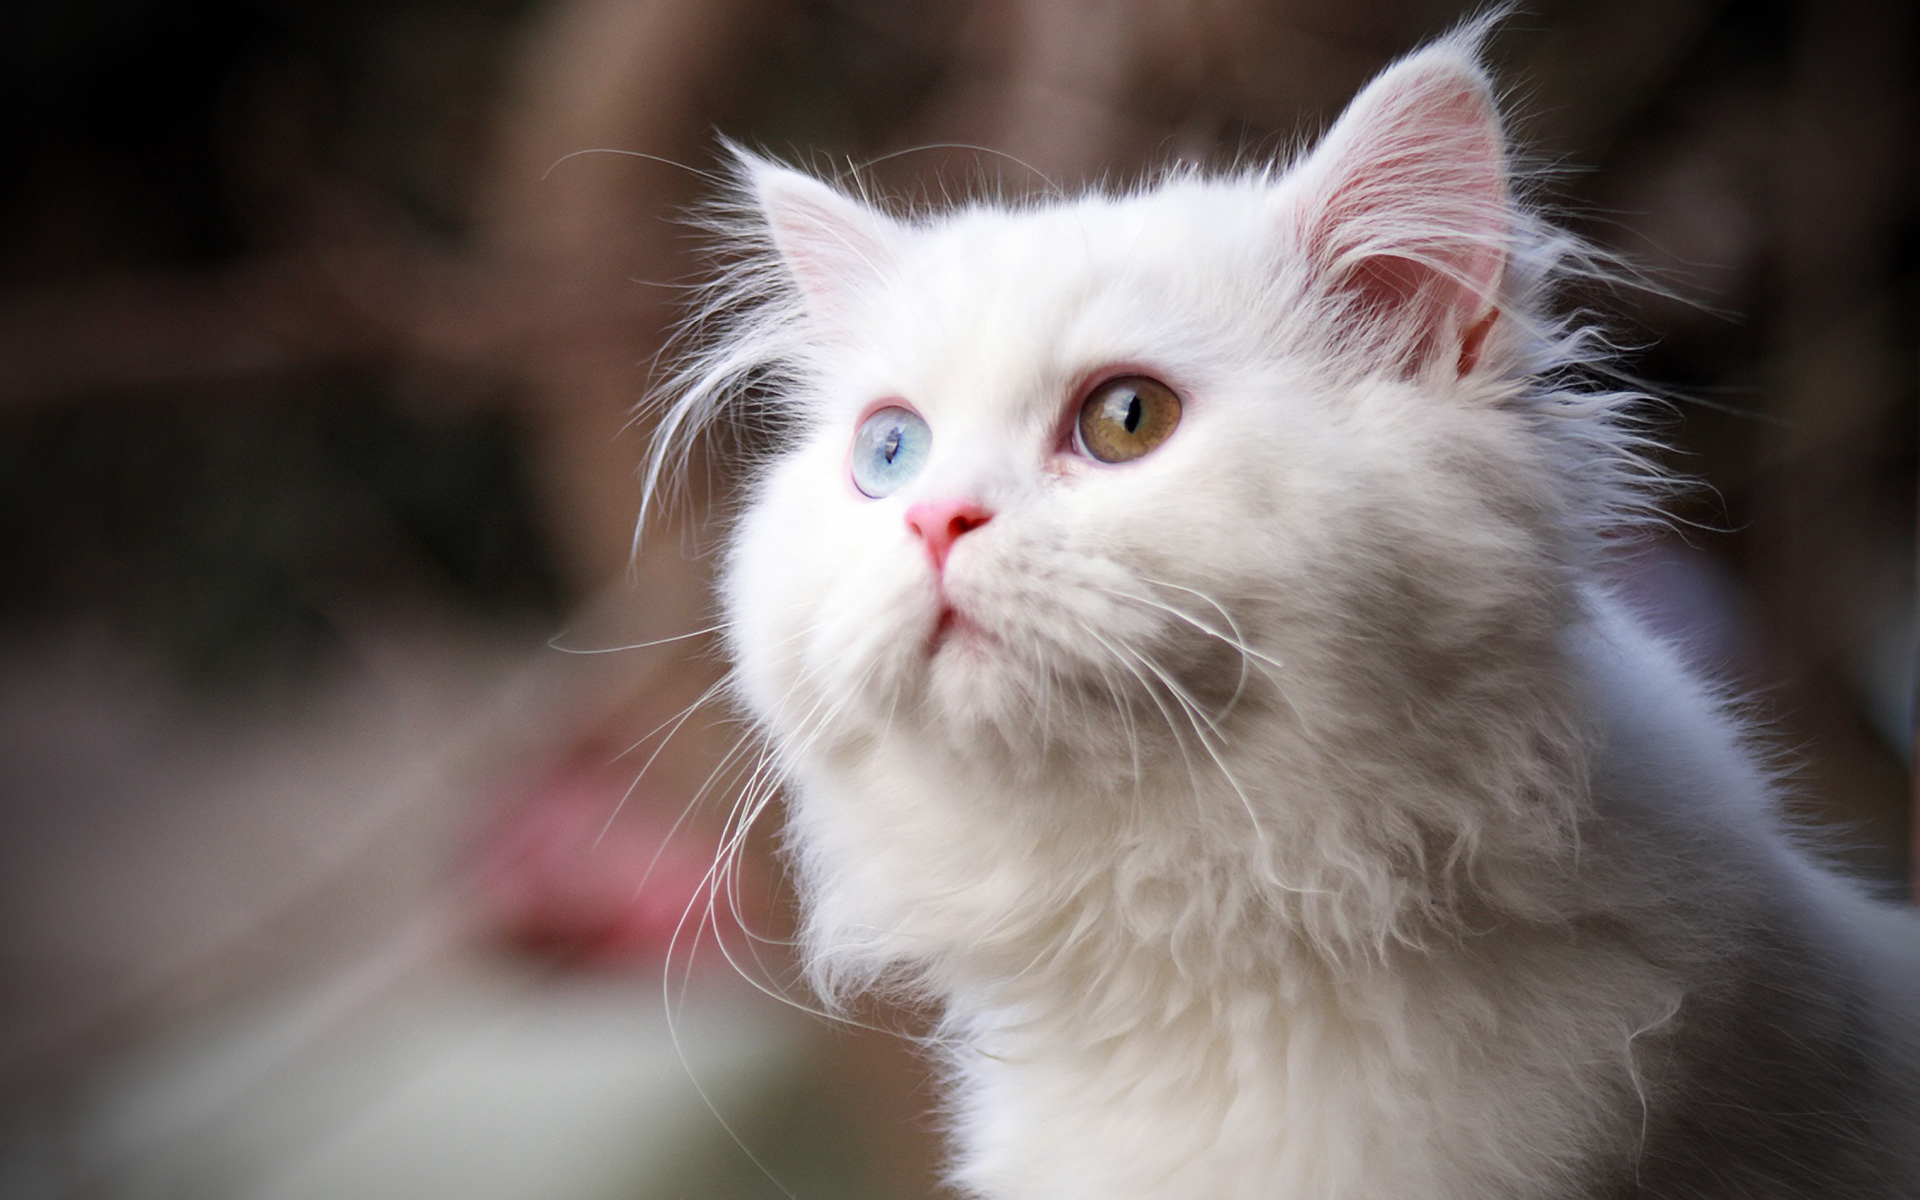 White Cats with Amazing Beautiful Eyes - funnycatsgif.com